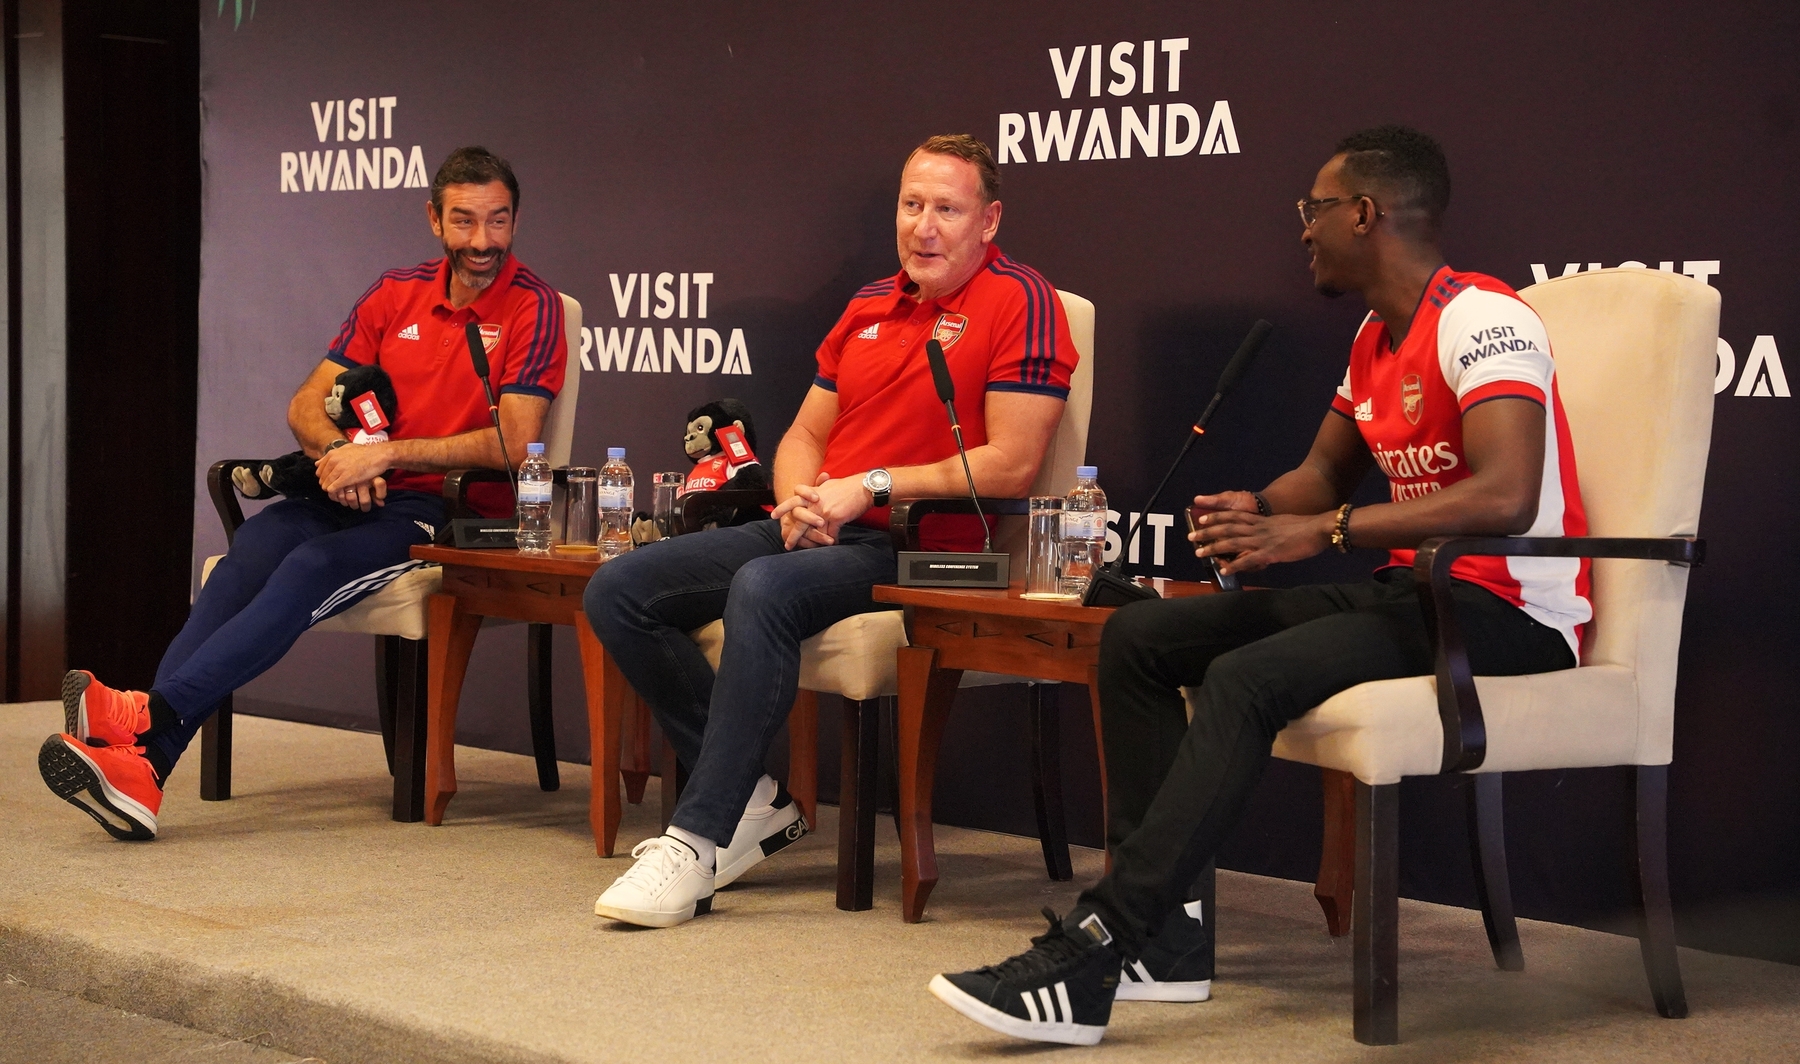 Robert Pires (L) and Ray Parlour (C) met with Arsenal fans, and were received by President Paul Kagame on Wednesday. They also trekked the mountain gorillas on Tuesday. 